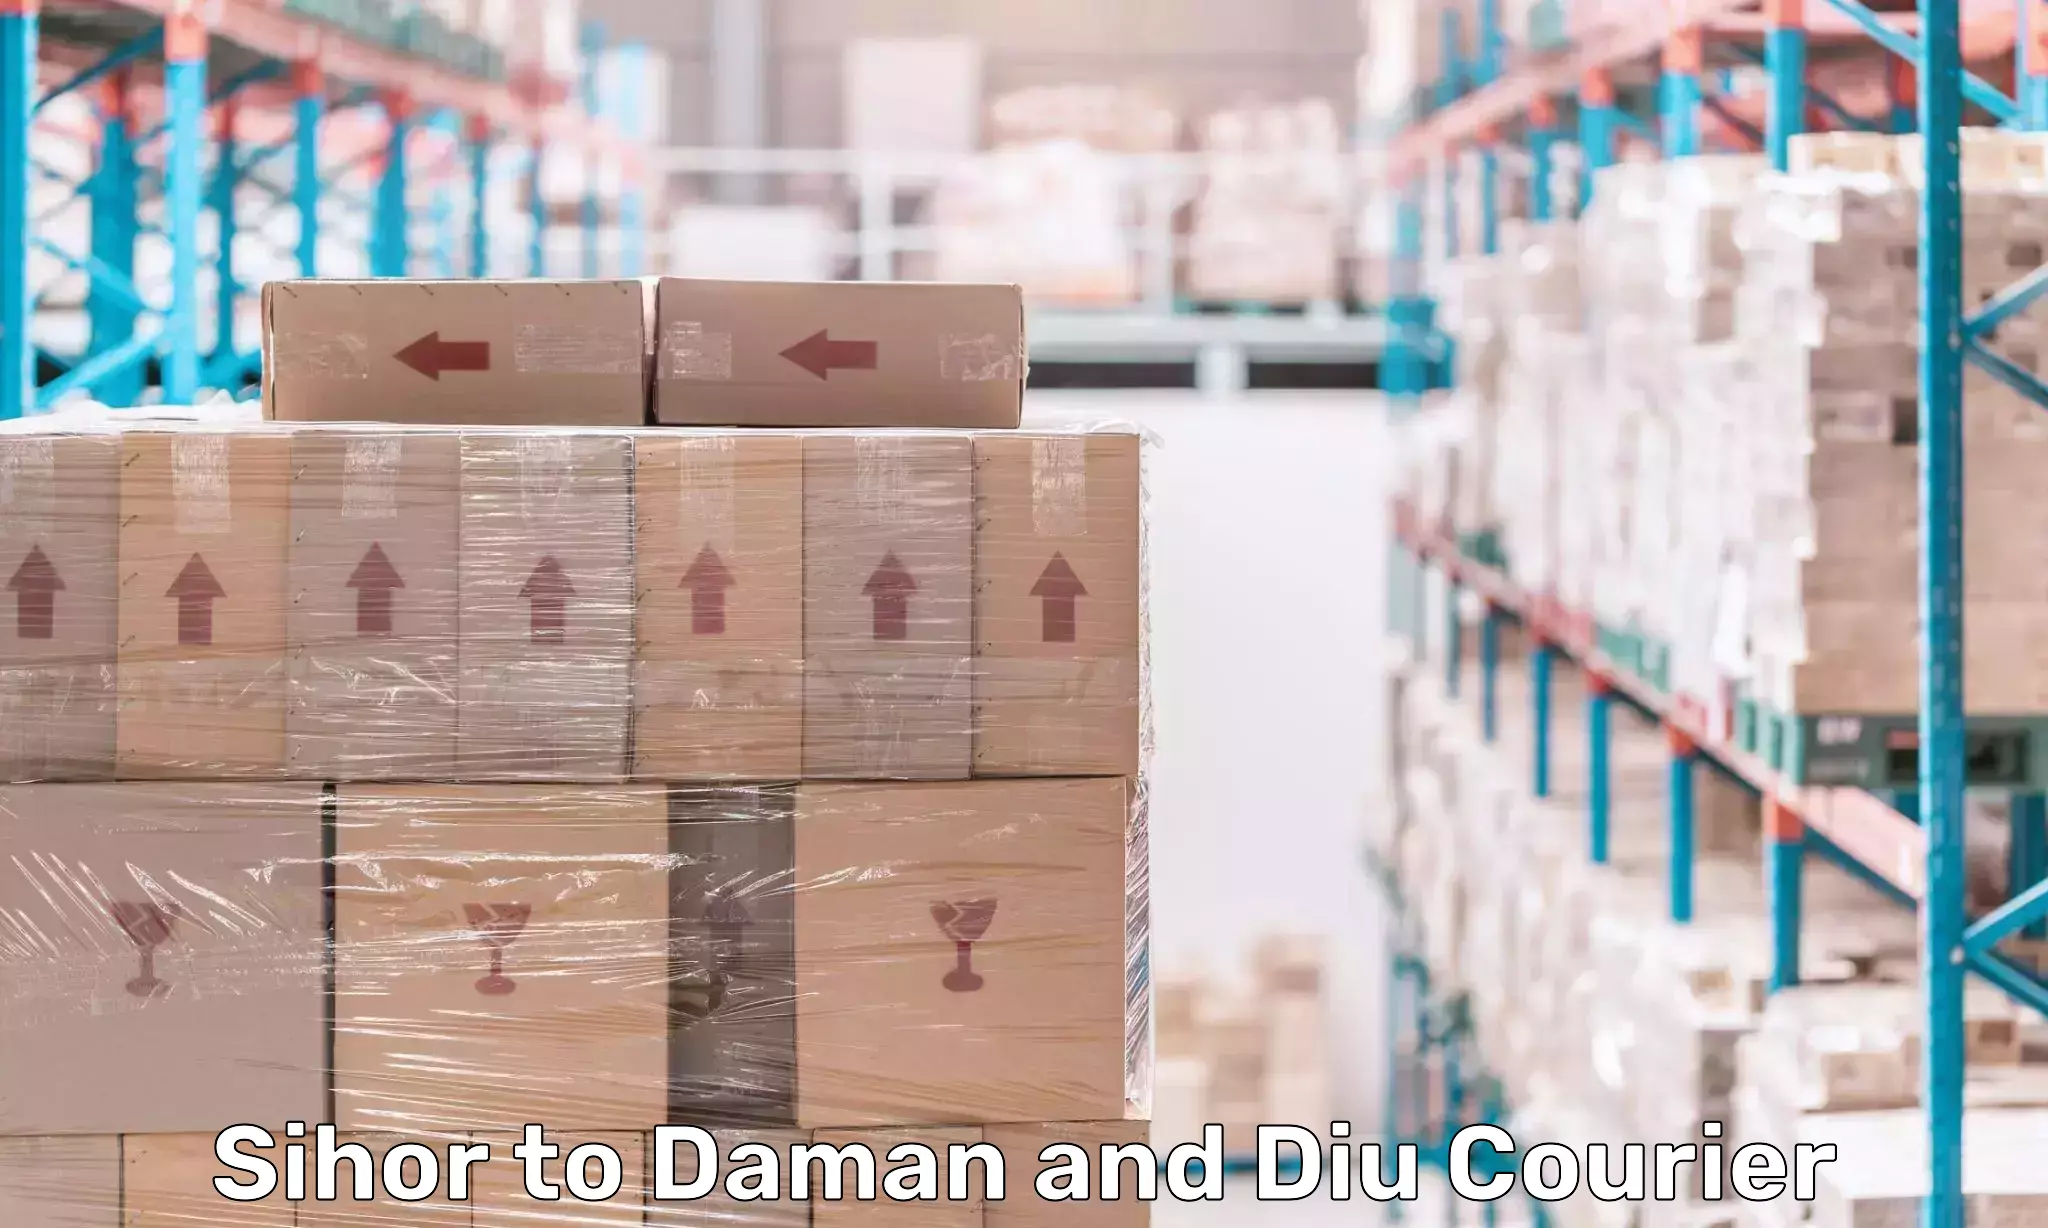 Express courier capabilities in Sihor to Daman and Diu